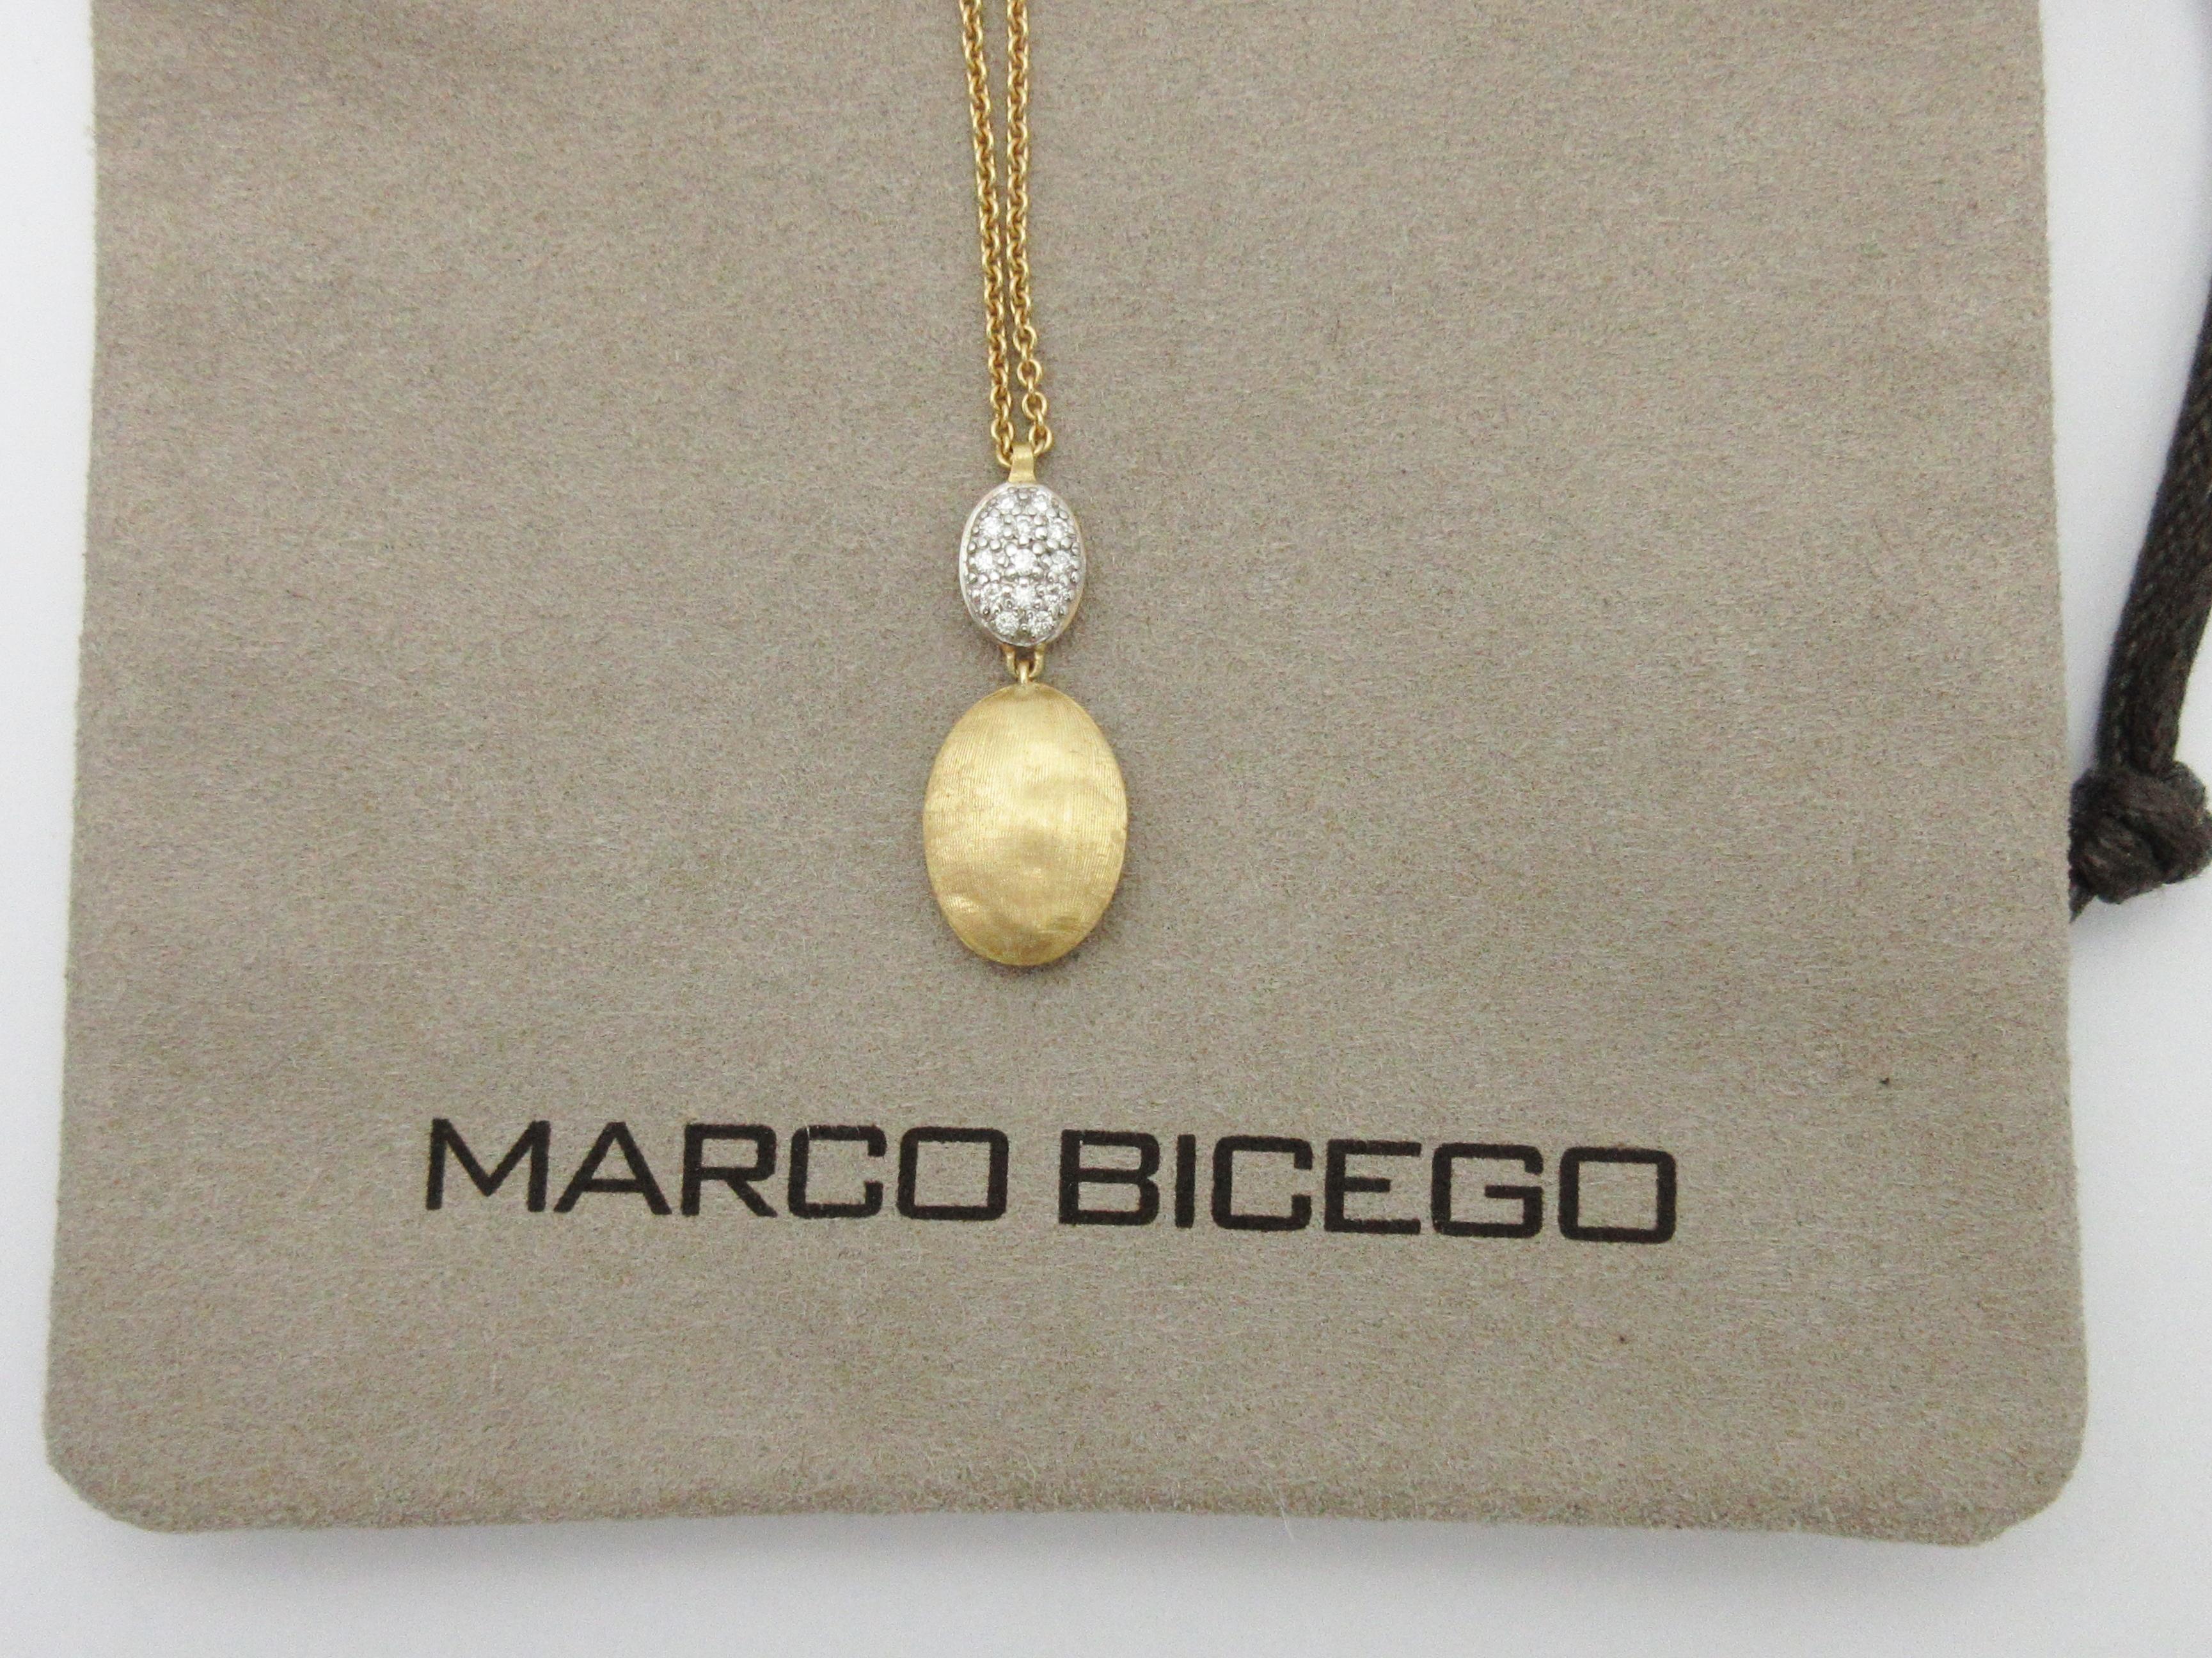 This beautiful necklace by designer Marco Bicego is from his Siviglia collection and features two pebble drops, one with diamonds set in white gold.  The total diamond weight is approximately .10cttw, and the necklace is adjustable in length from